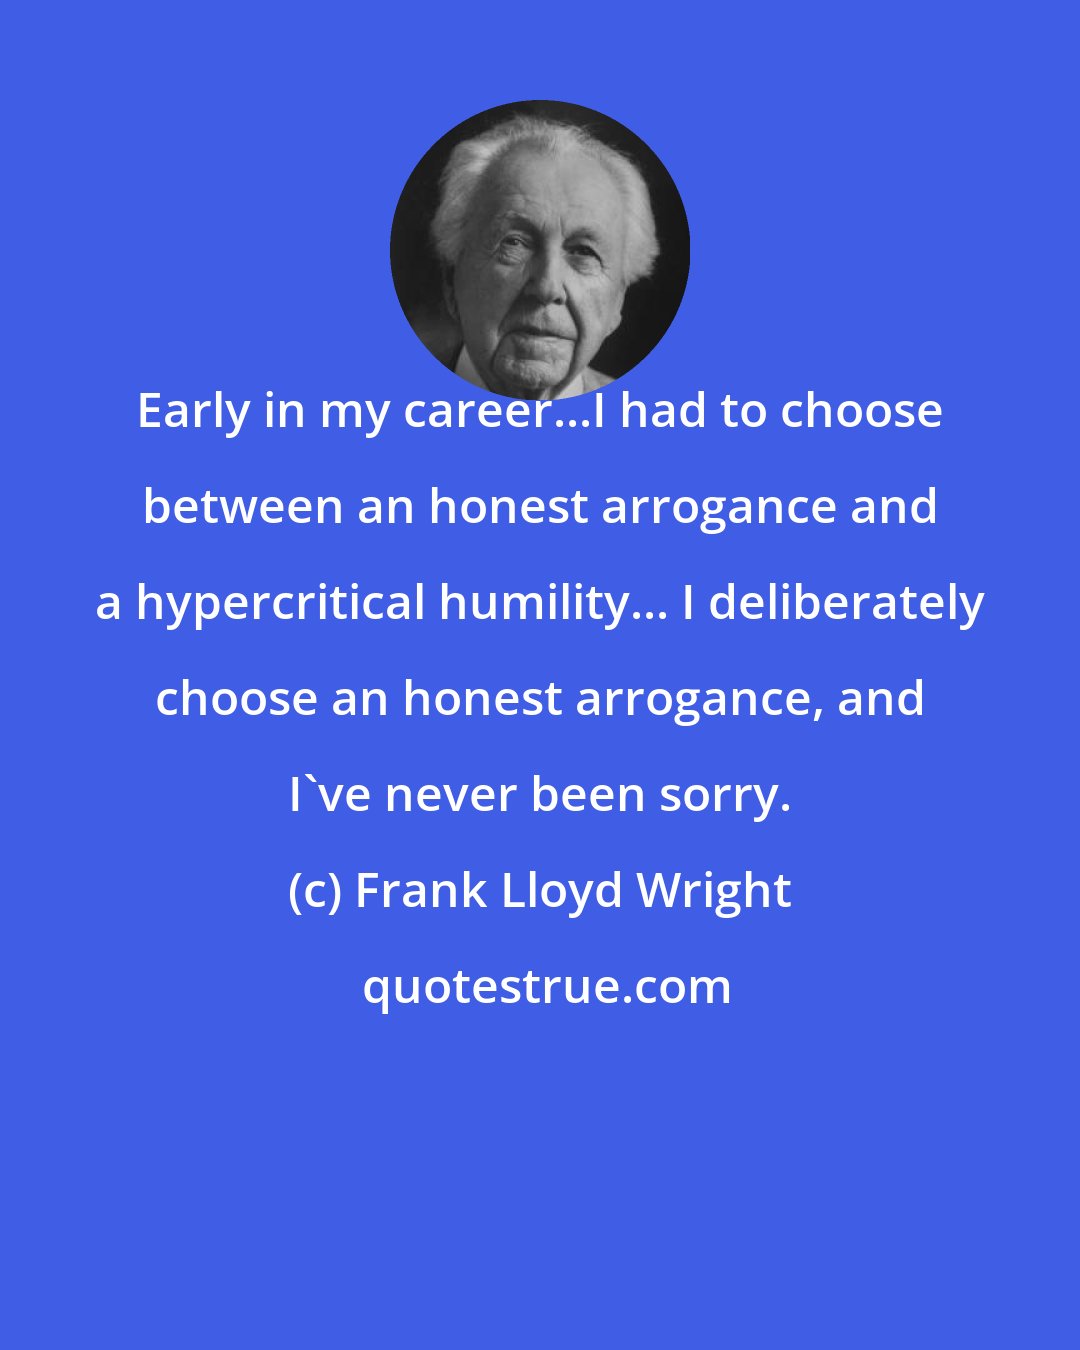 Frank Lloyd Wright: Early in my career...I had to choose between an honest arrogance and a hypercritical humility... I deliberately choose an honest arrogance, and I've never been sorry.